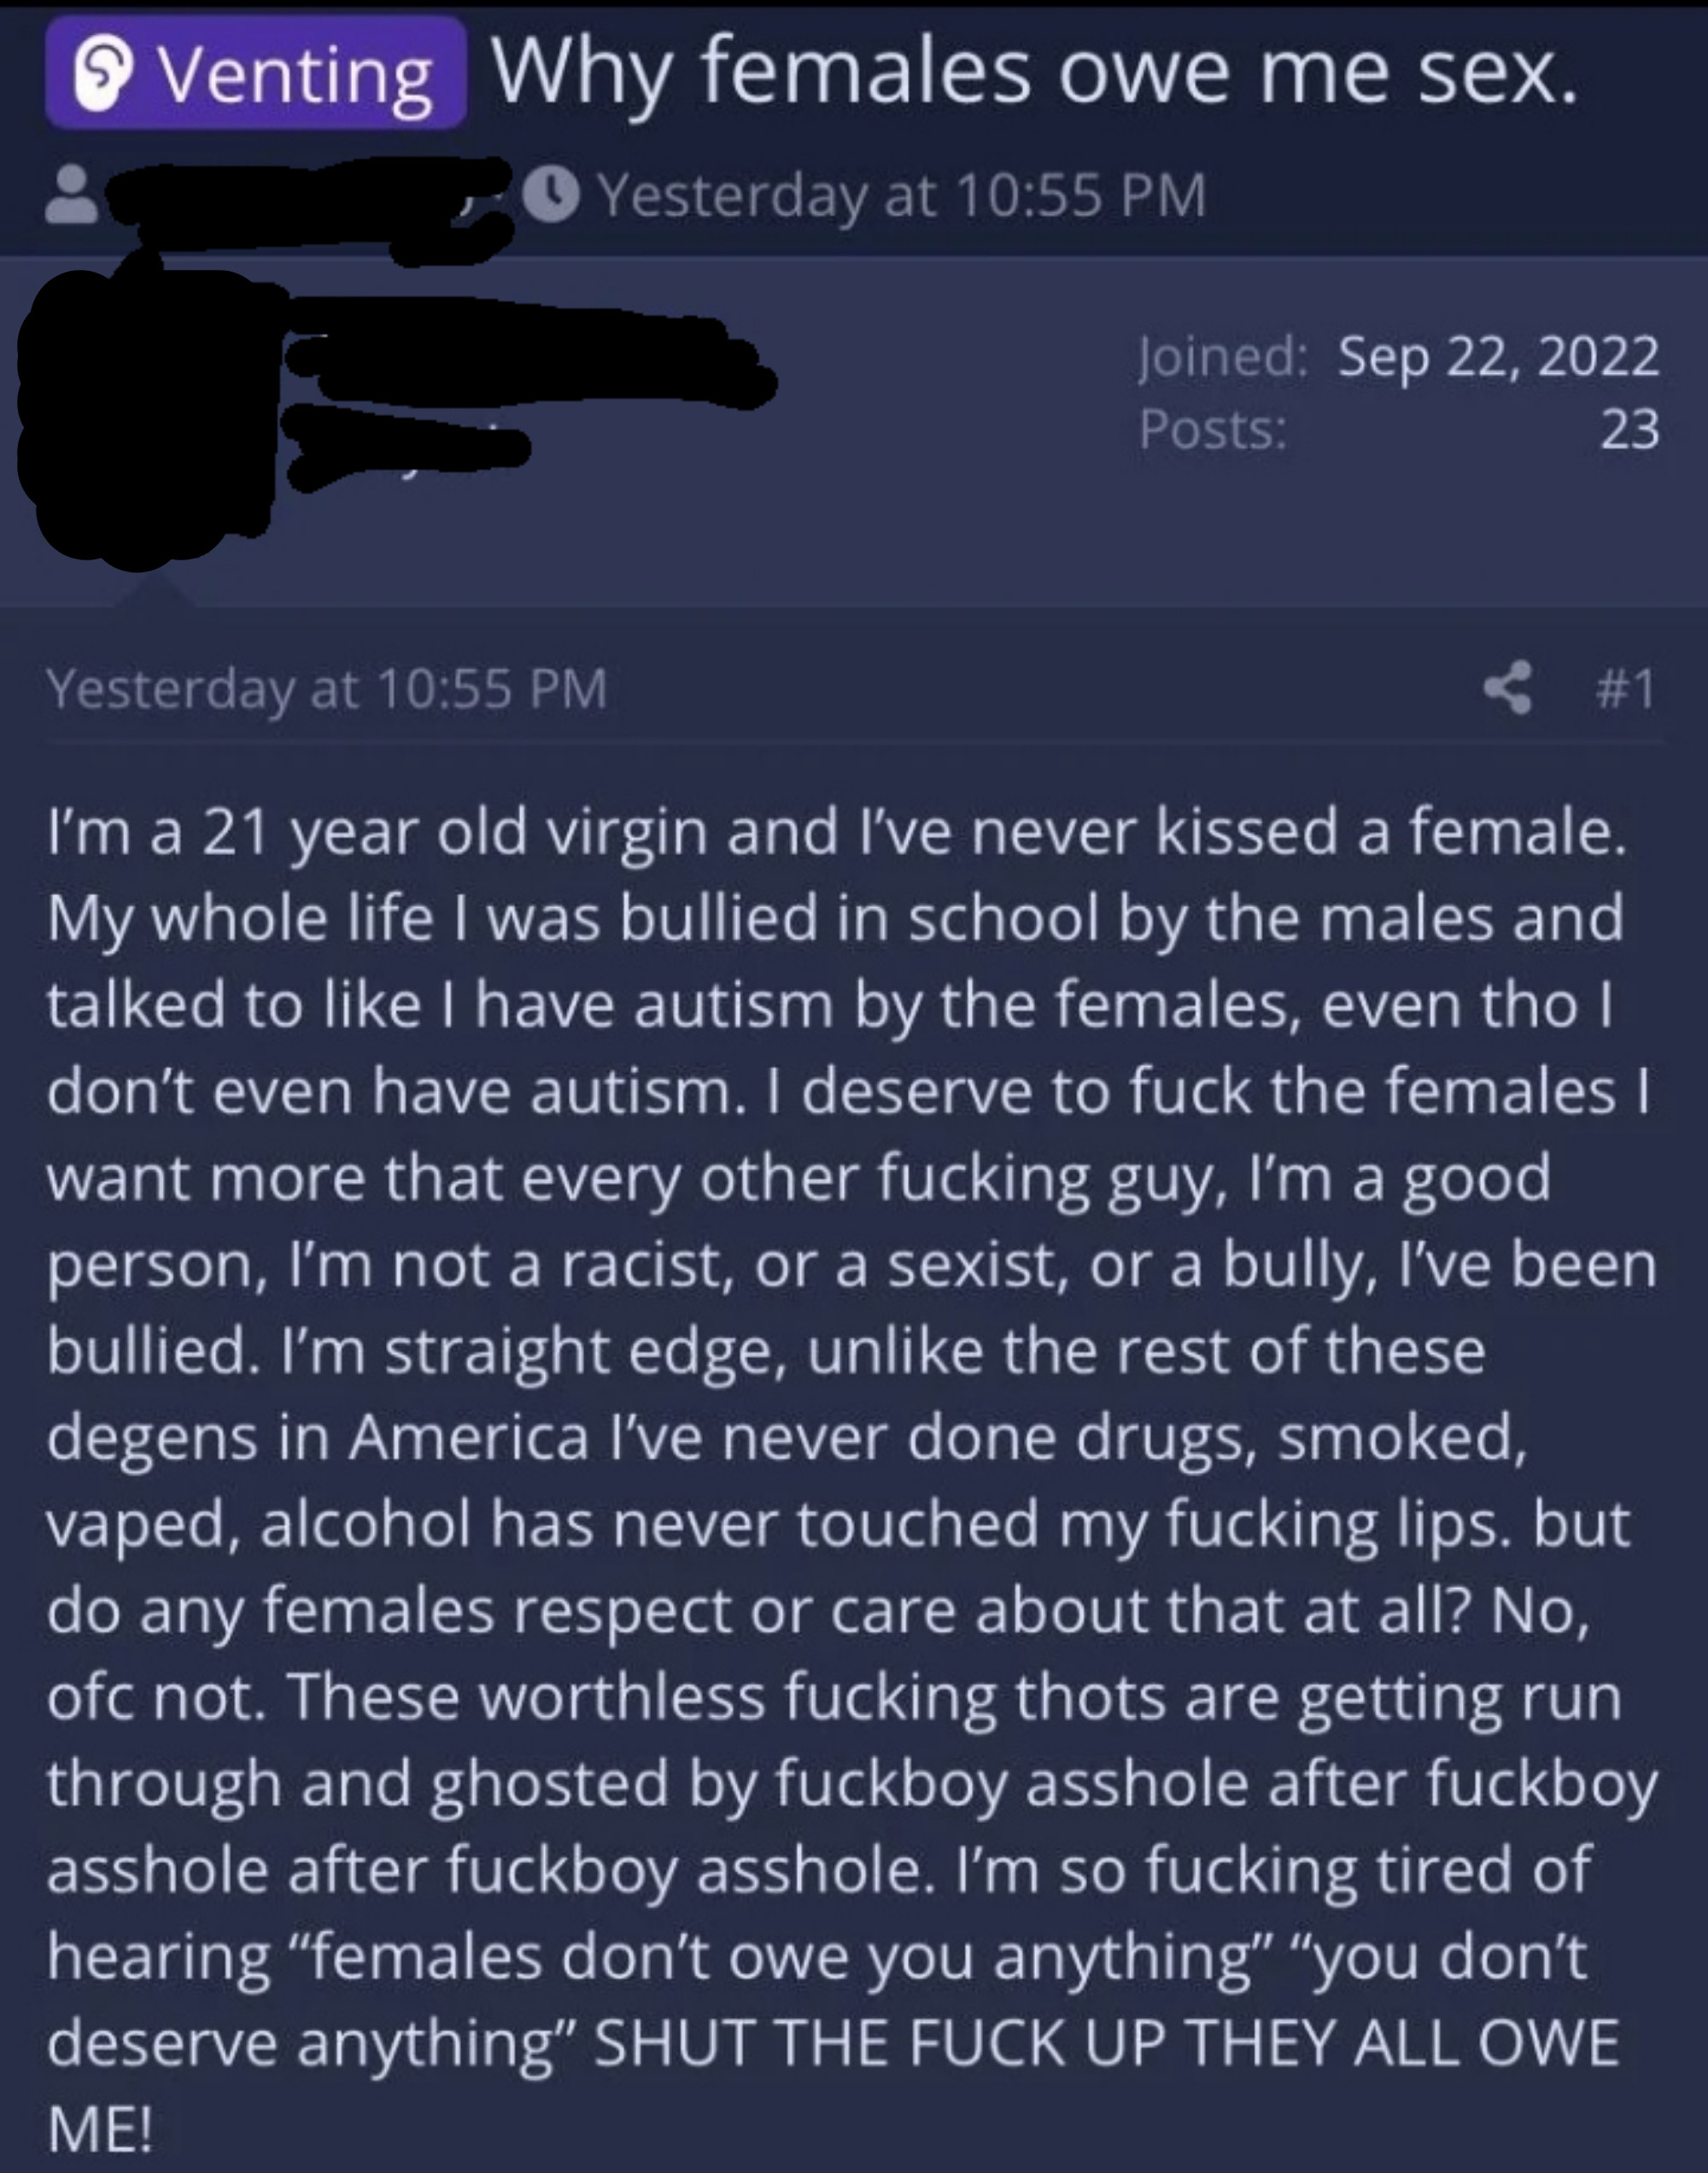 A 21-year-old virgin who&#x27;s never been kissed &quot;deserves to fuck the females&quot; he wants more than any other guy because he&#x27;s a good person, not a racist, a sexy, or a bully, but &quot;these worthless fucking thots are getting run through&quot; by &quot;fuckboy assholes&quot;